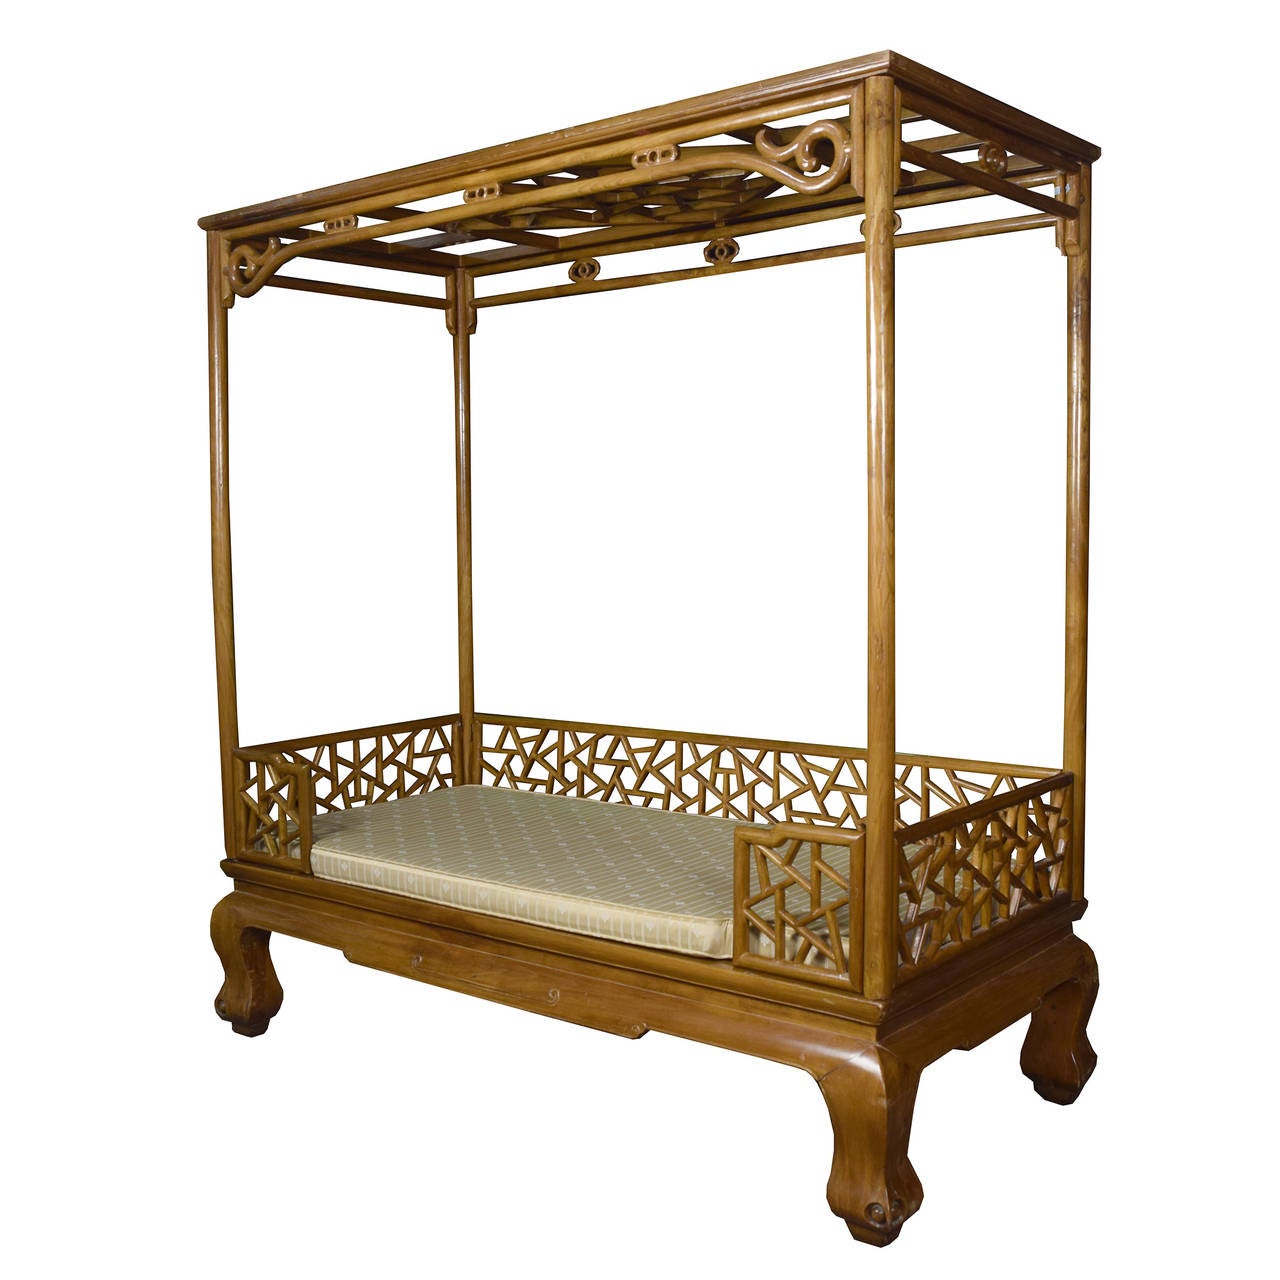 Chinese canopy bed from c.1900 with cracked ice pattern made a Chinese Southern Elmwood and a custom cushion.

Pagoda Red Collection #CANB001